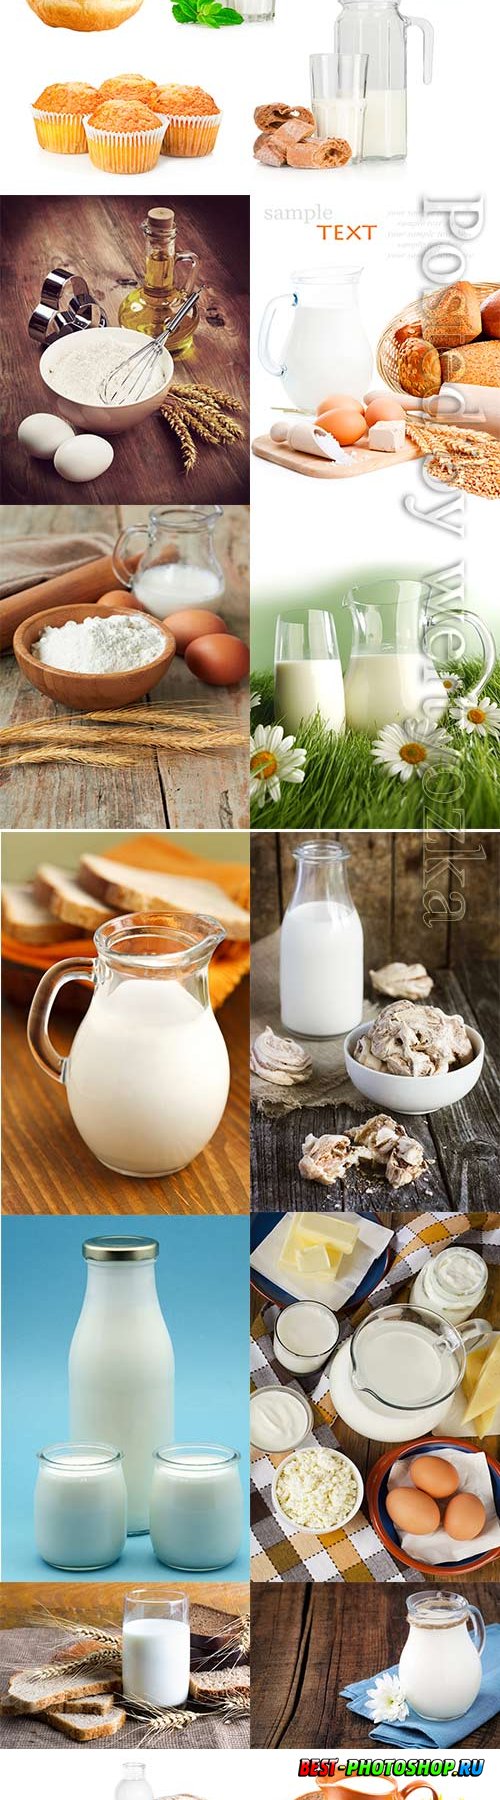 Milk and dairy products stock photo